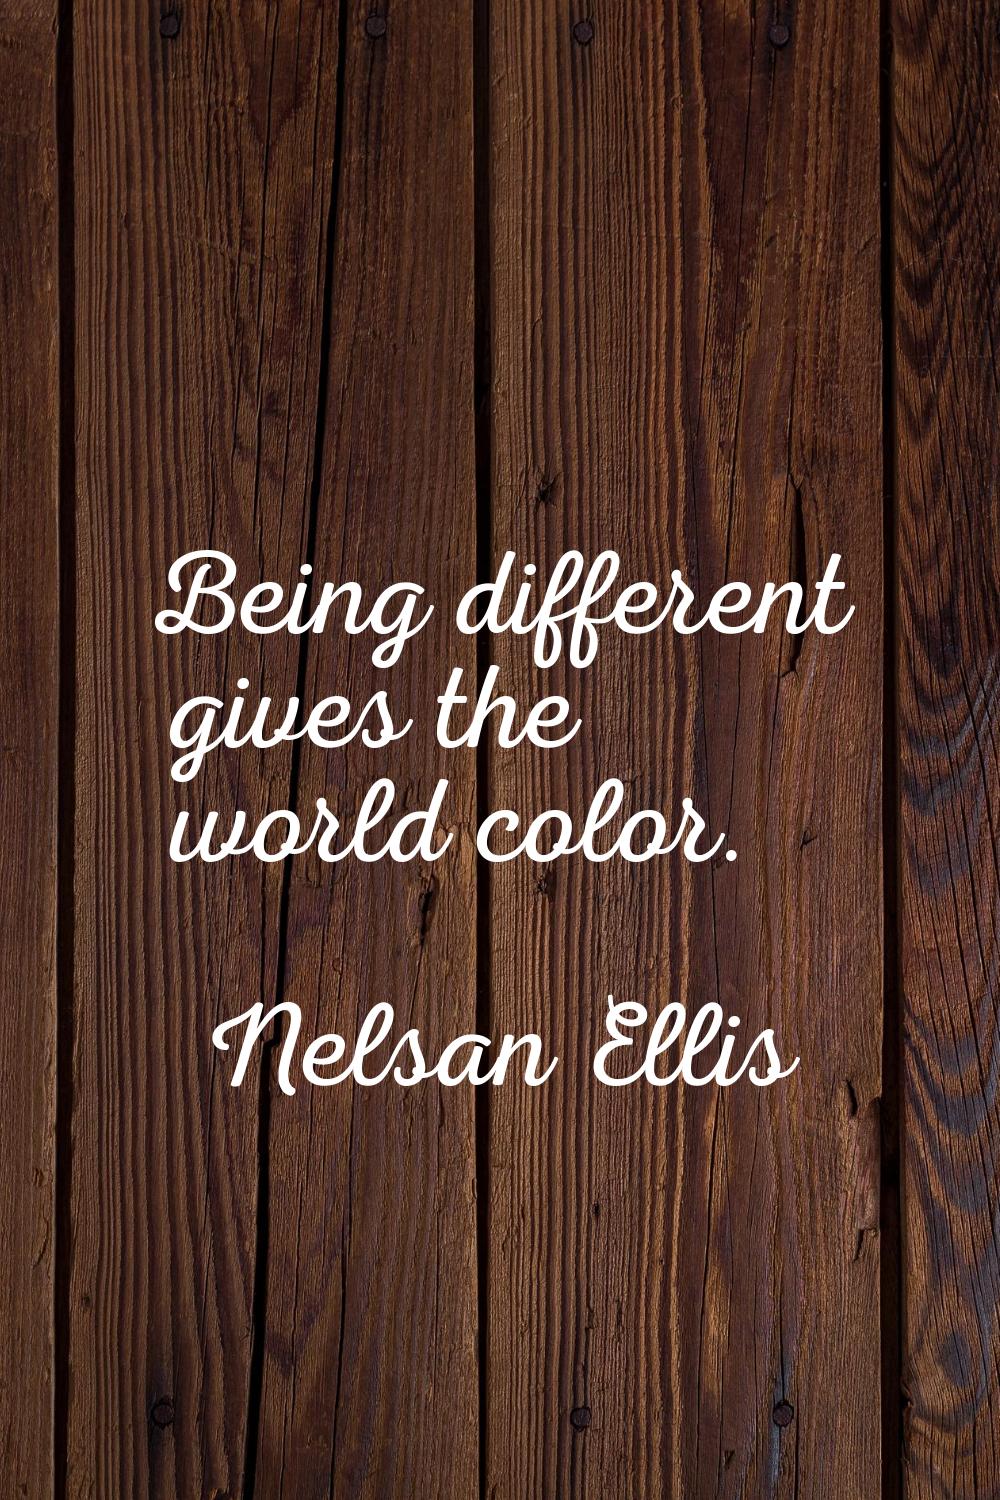 Being different gives the world color.